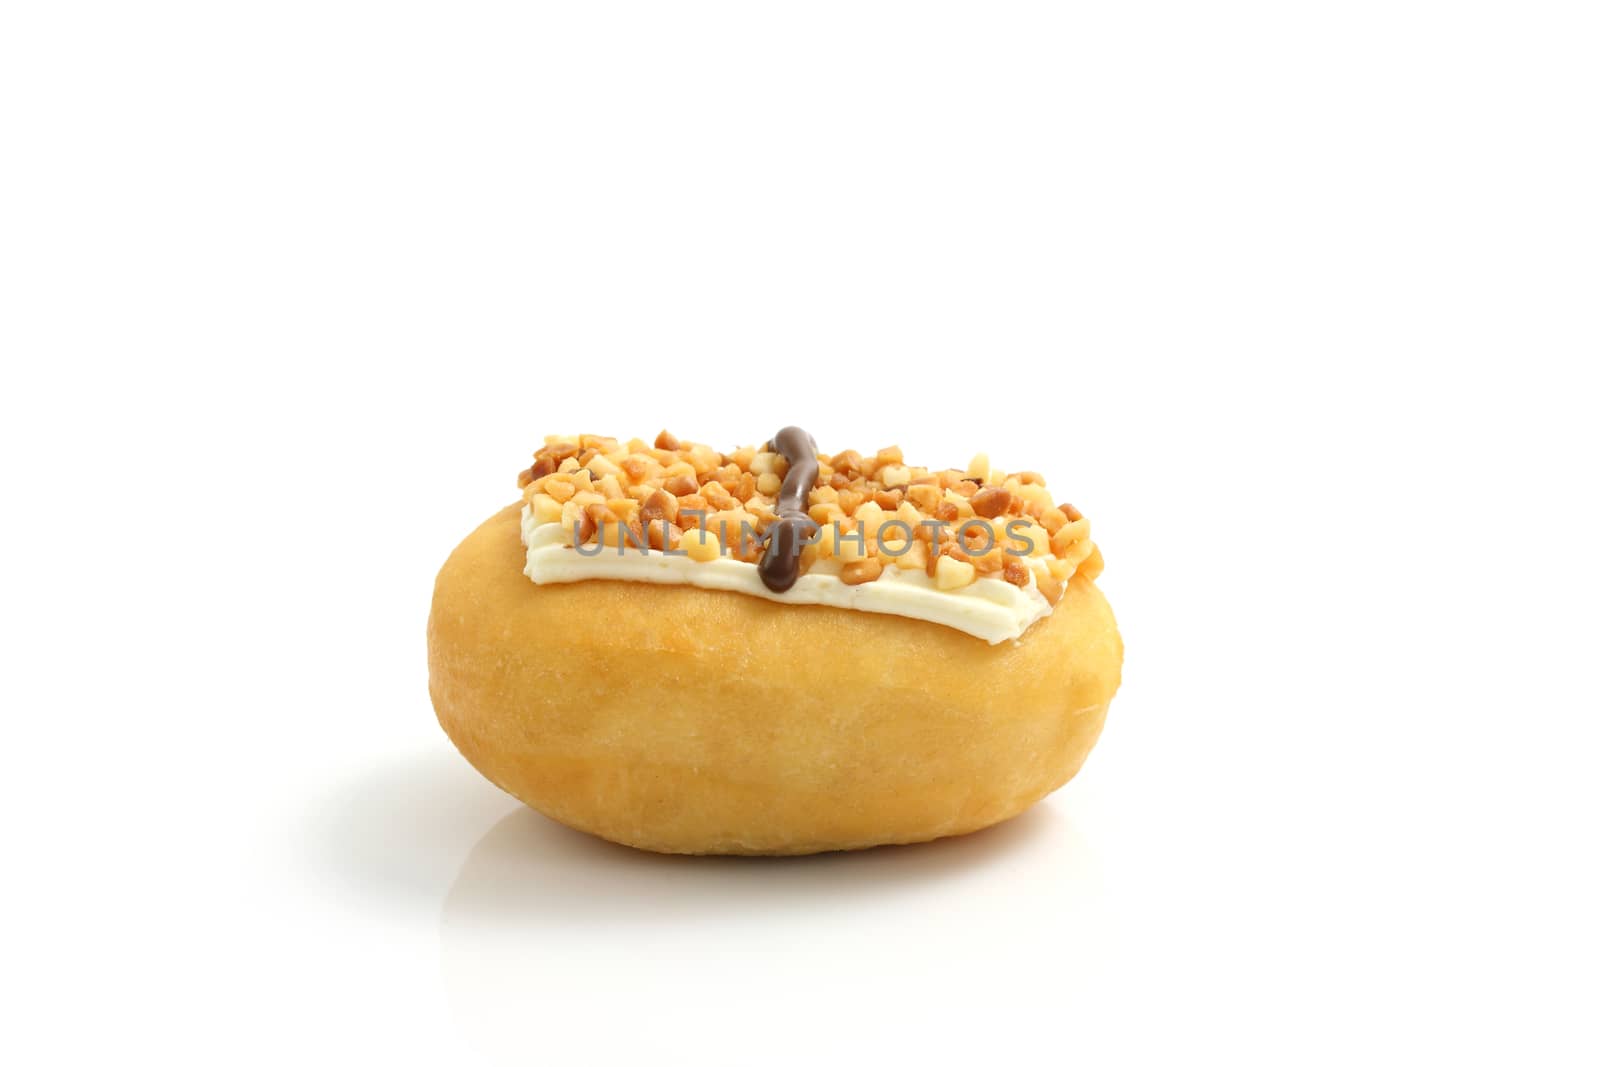 Donut isolated in white background by piyato